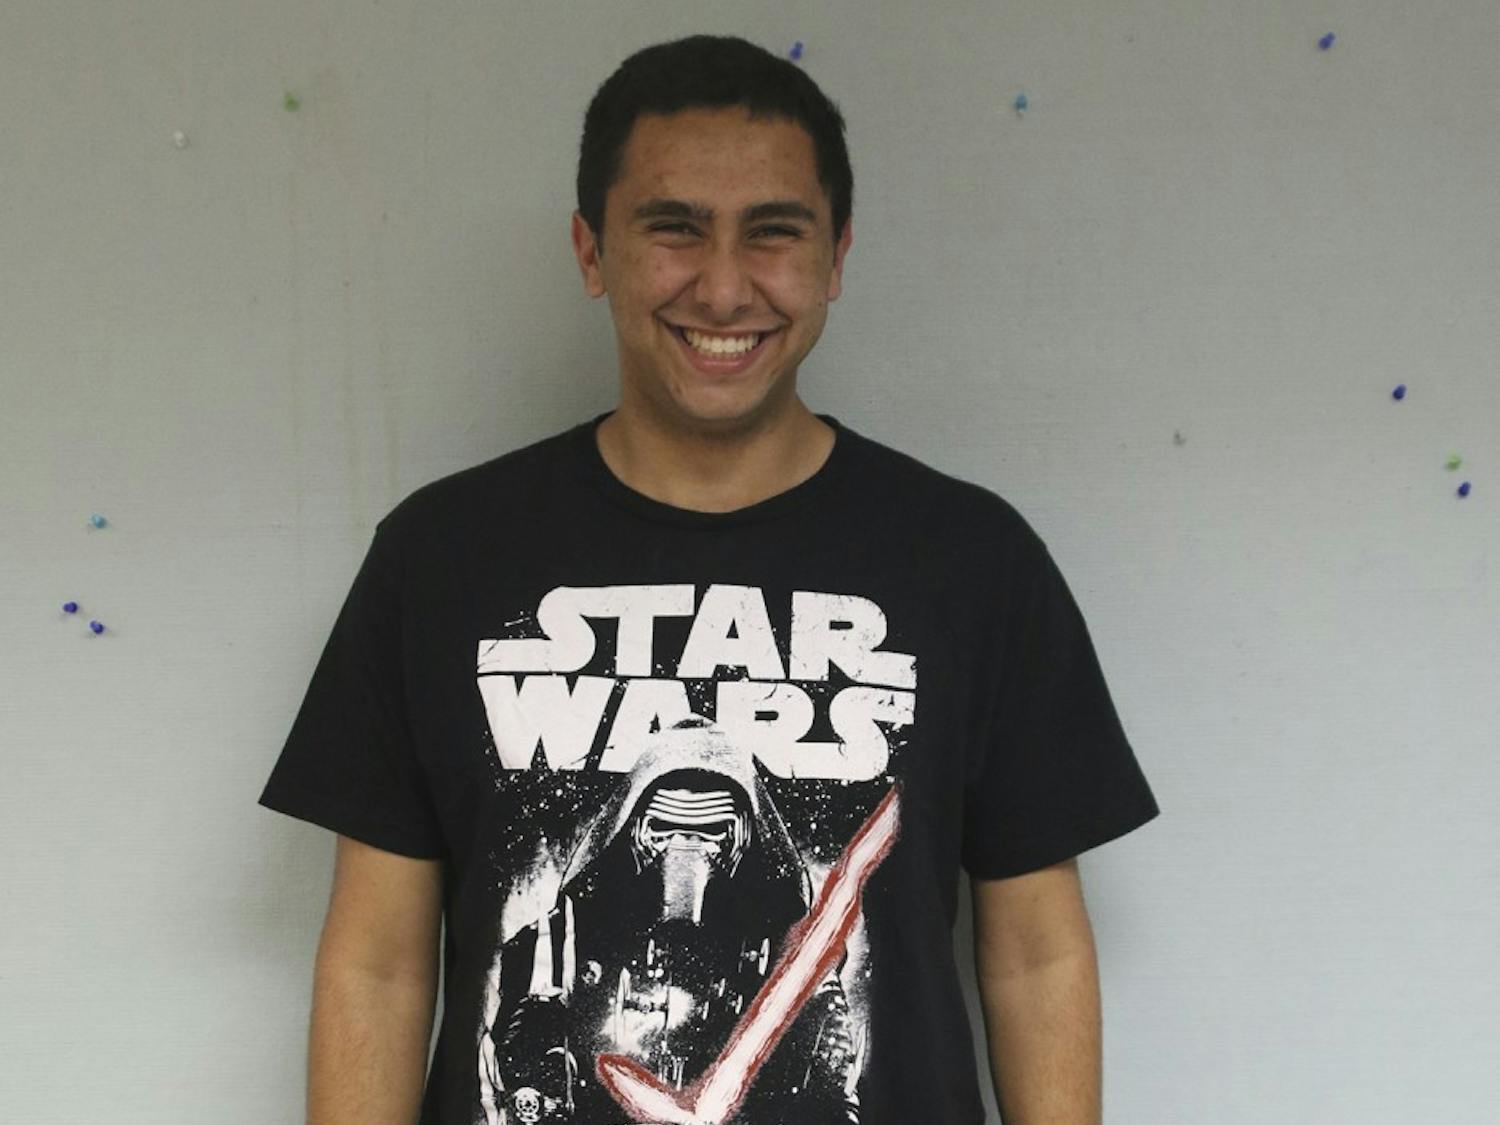 Co-Photo Editor Alex Kormann is a super fan of the Star Wars franchise and universe.